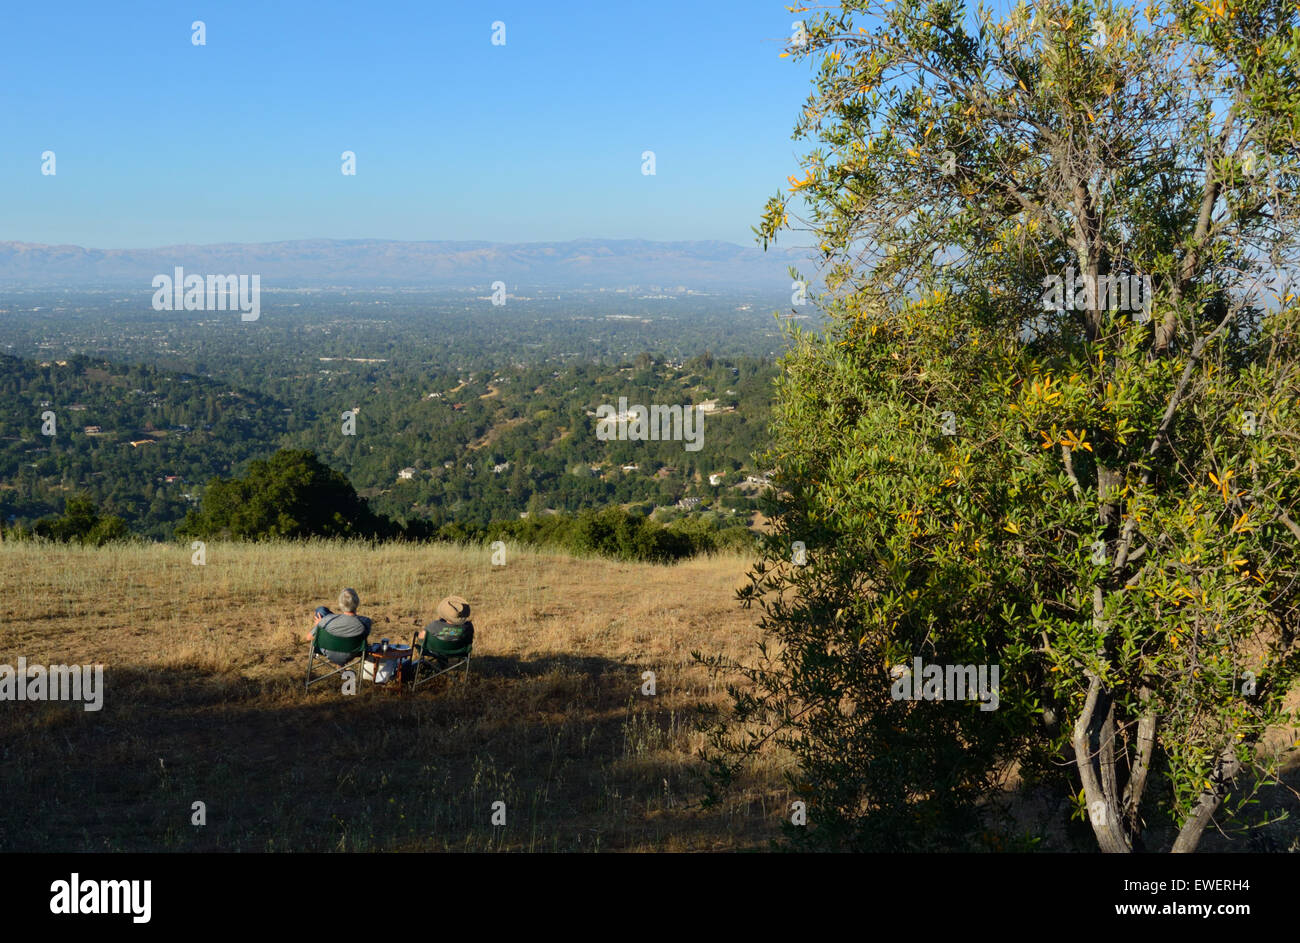 The Mountain Winery above Silicon Valley, Saratoga CA Stock Photo